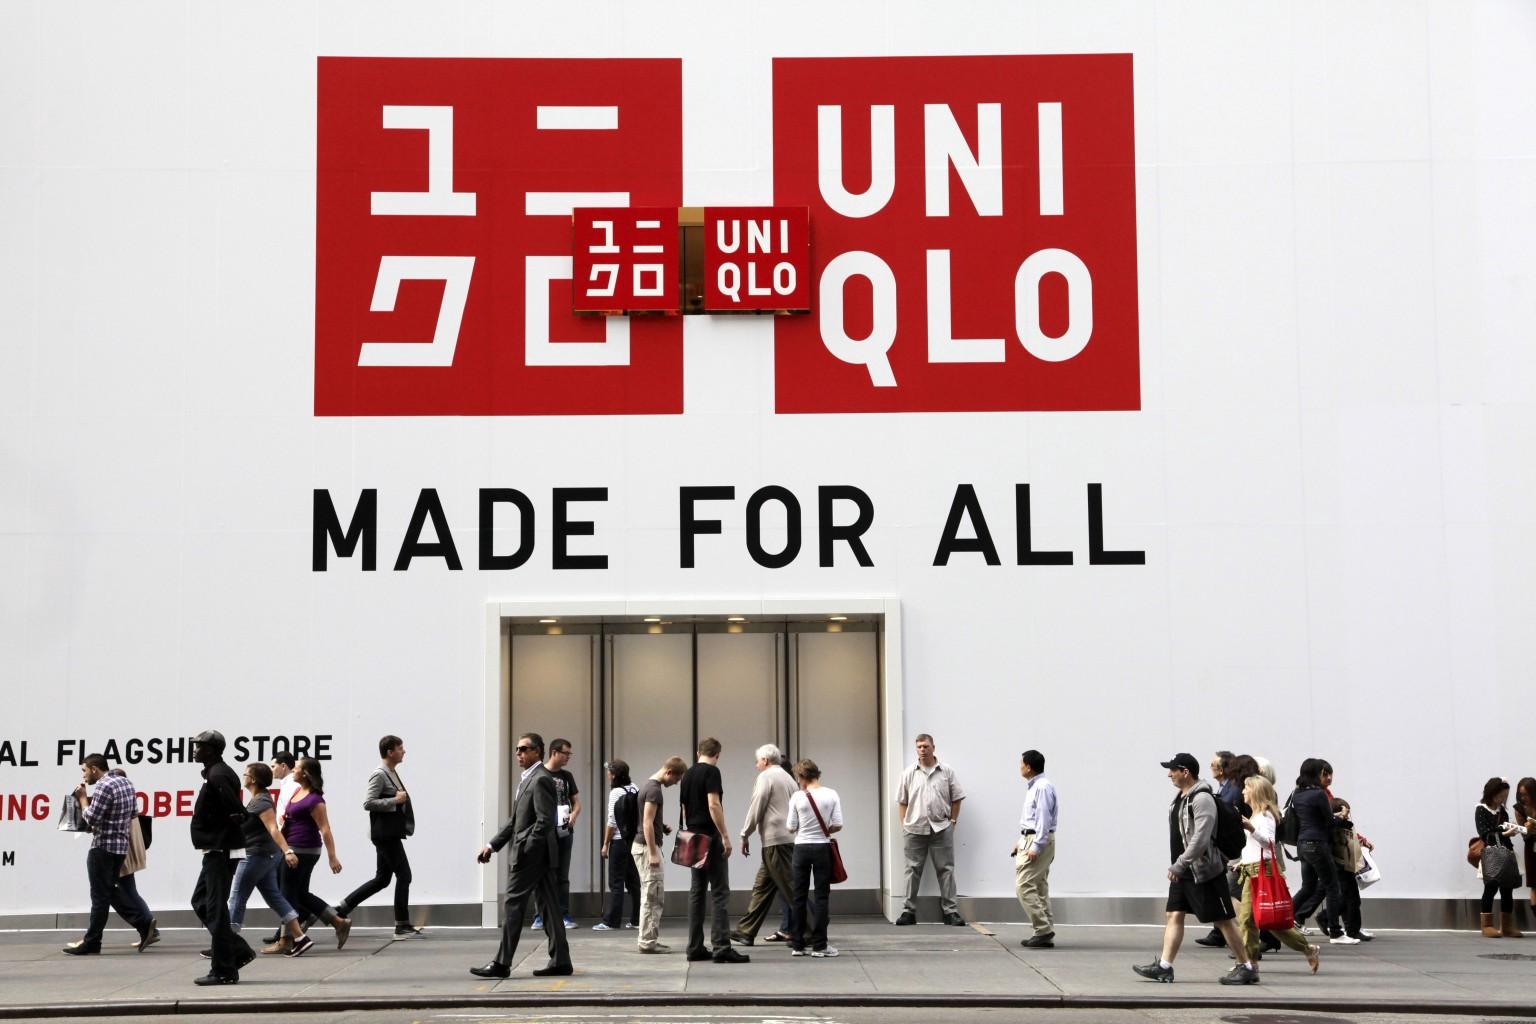 Is Uniqlo Ethical, Sustainable, or Fast Fashion?